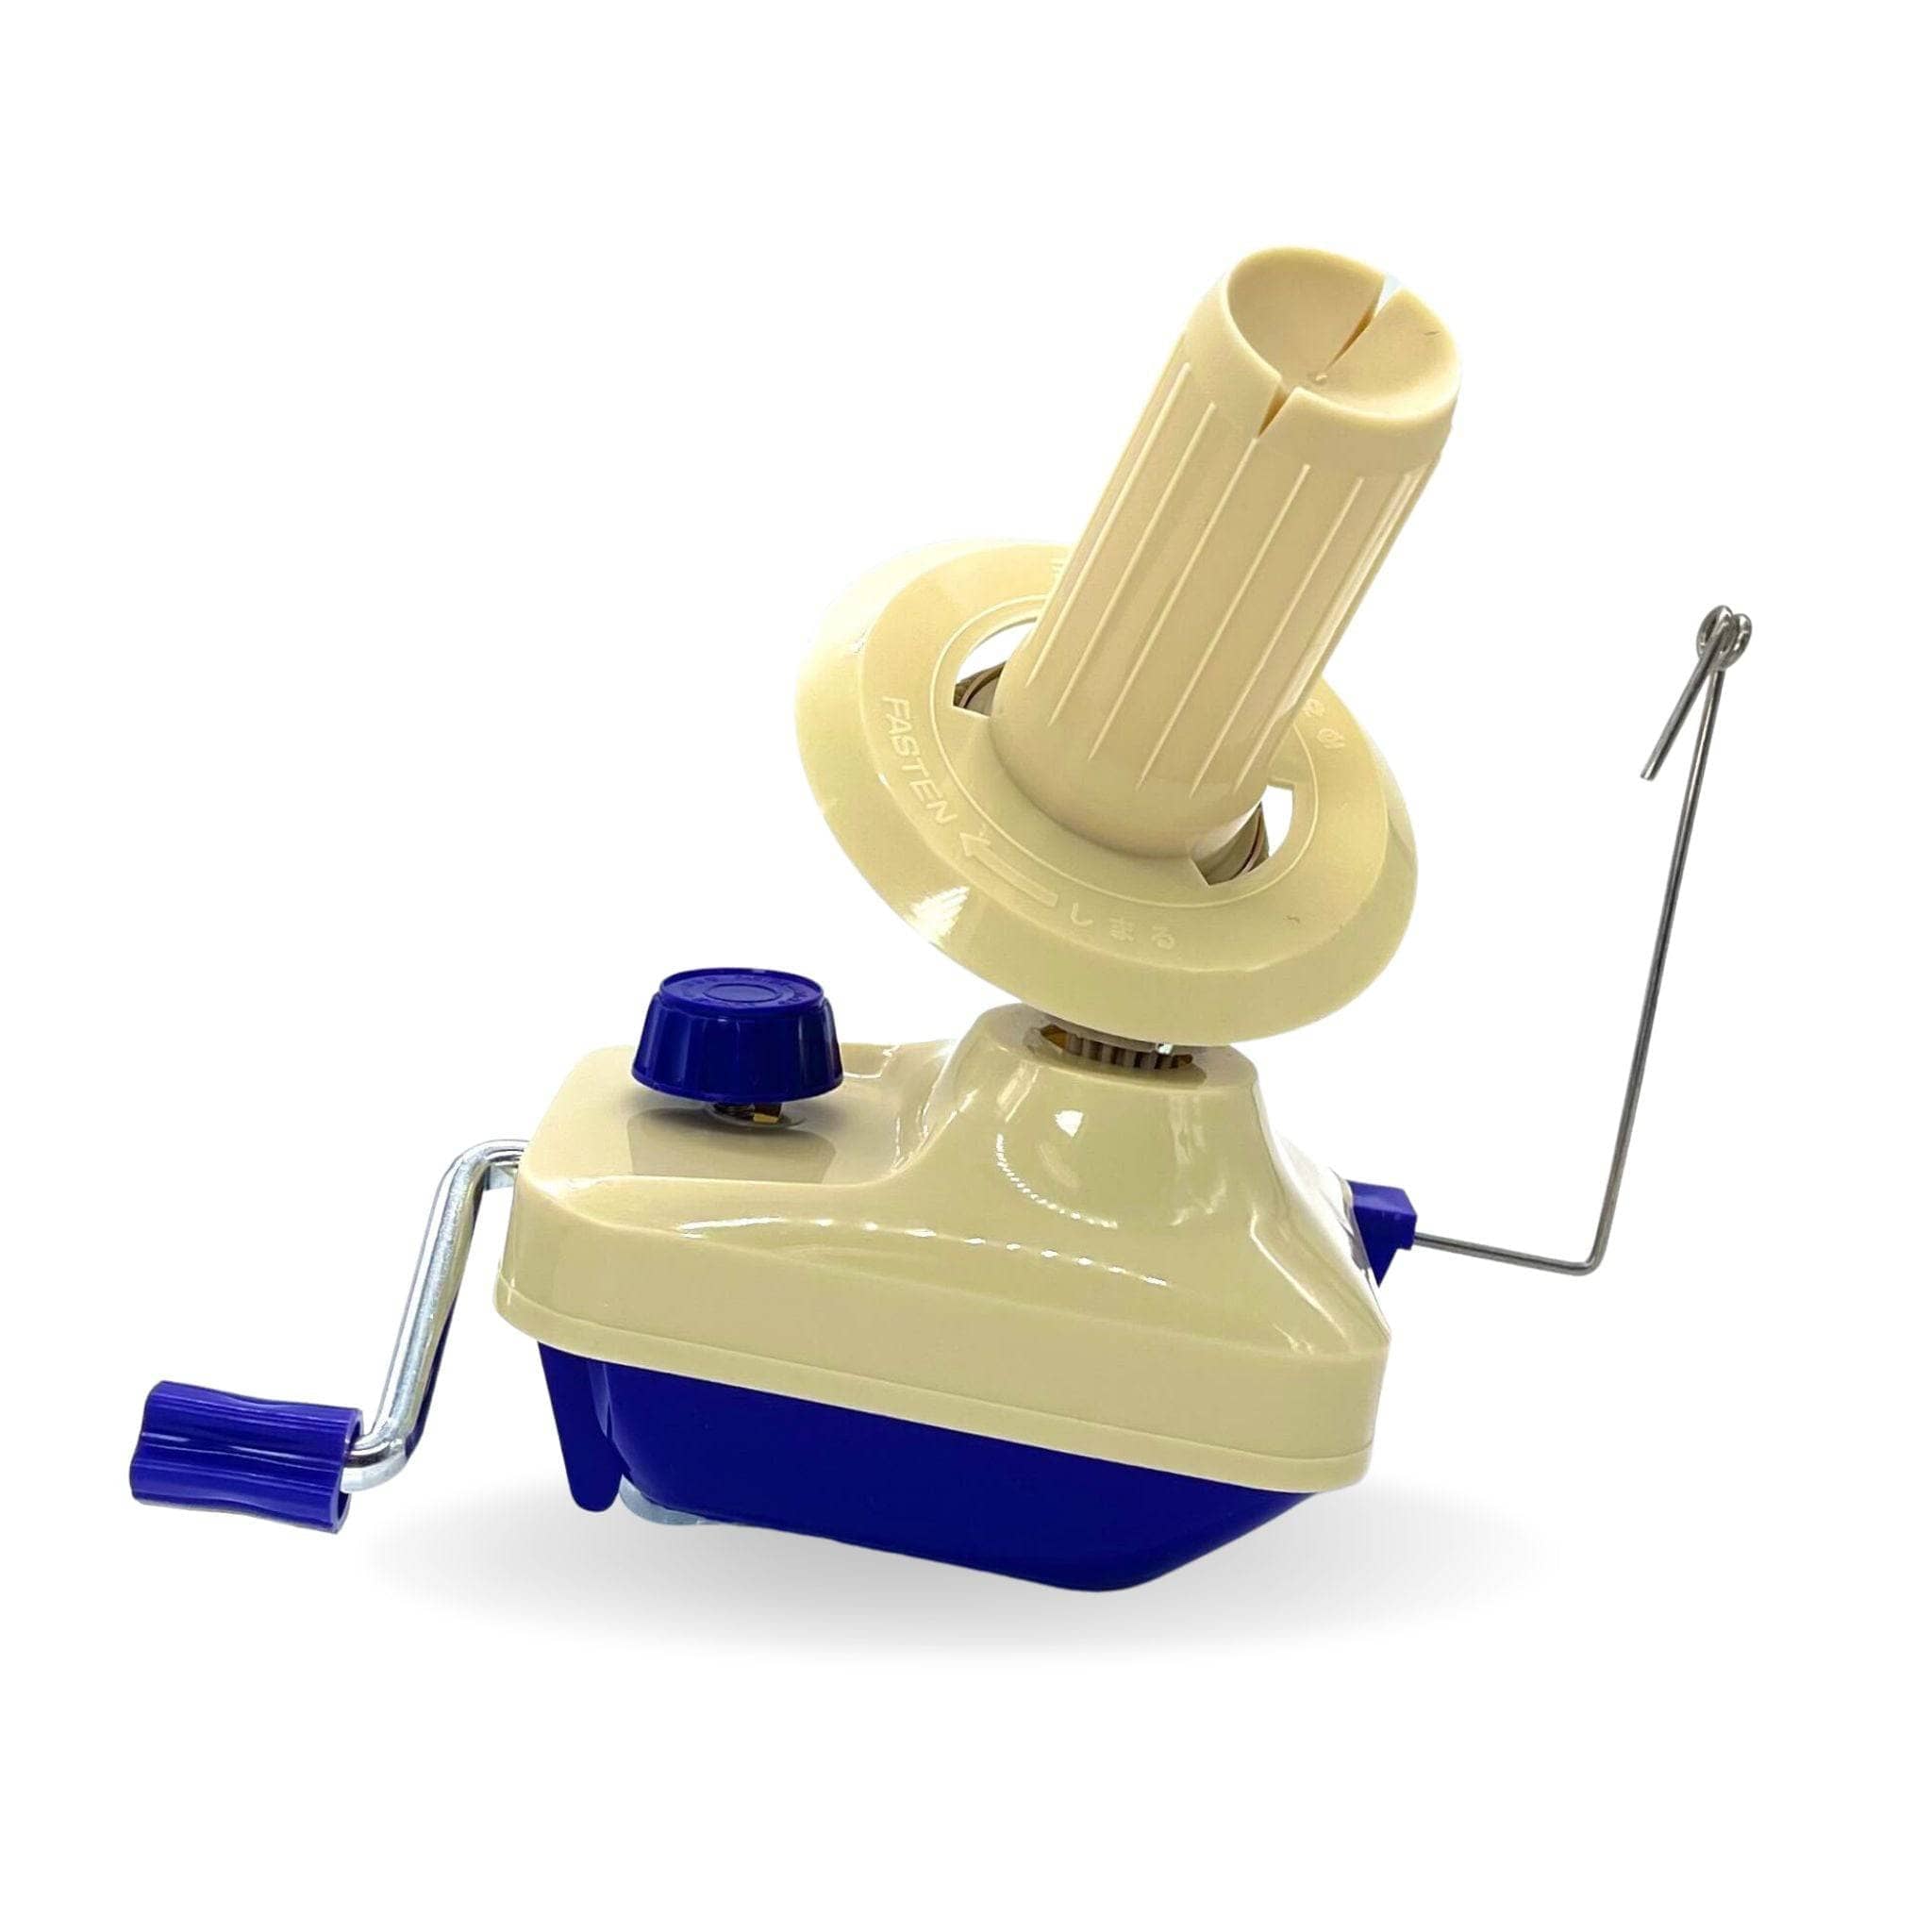 Yarn Ball Winder - Ethically Sourced Yarn, Craft Kits, Home Goods, Clothing & Accessories